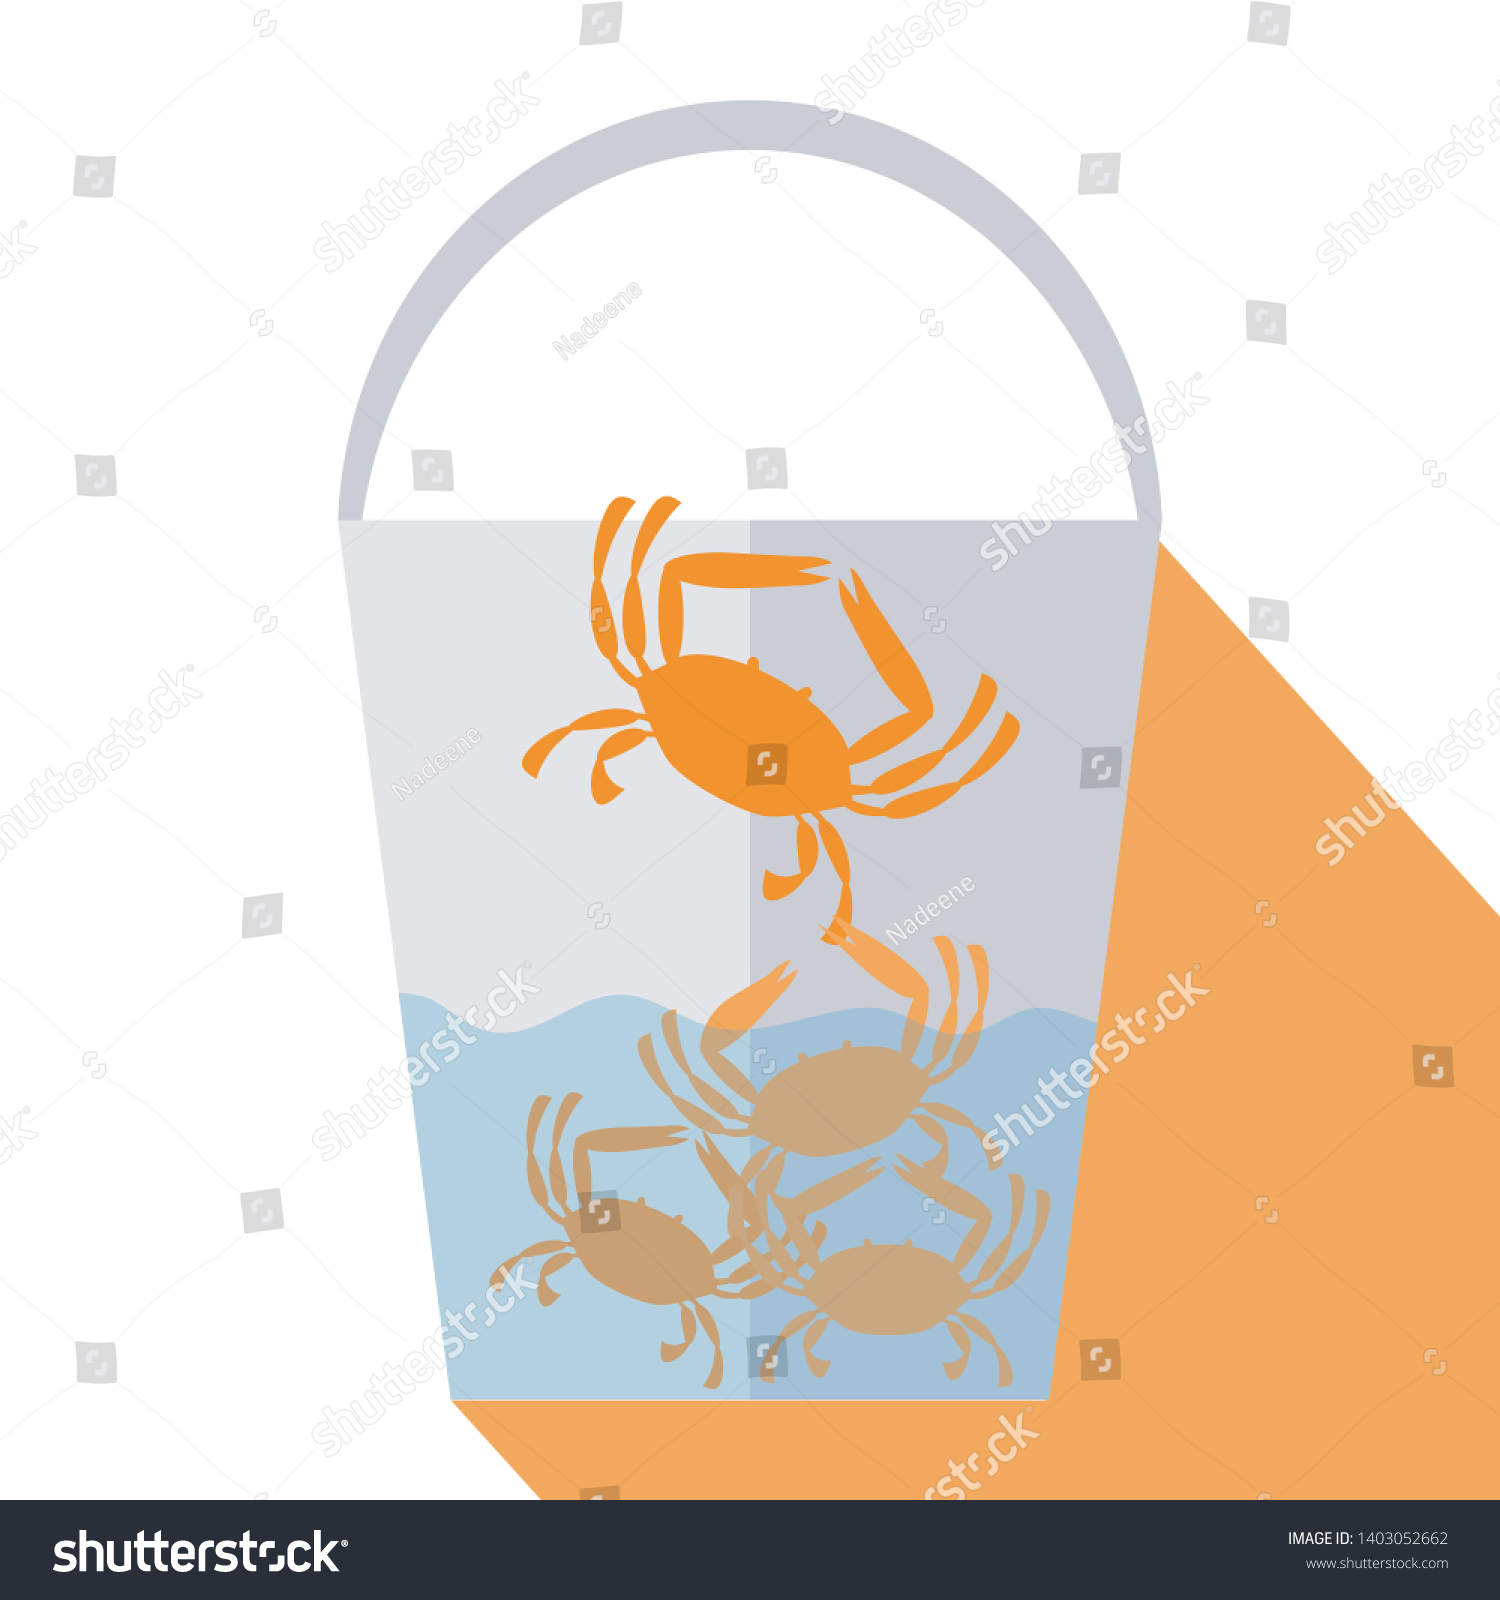 SVG of Vector image of a crab trying to climb out of a bucket while other crabs are trying to stop him. Crabs in a bucket. Crab mentality concept. Behavior concept. svg